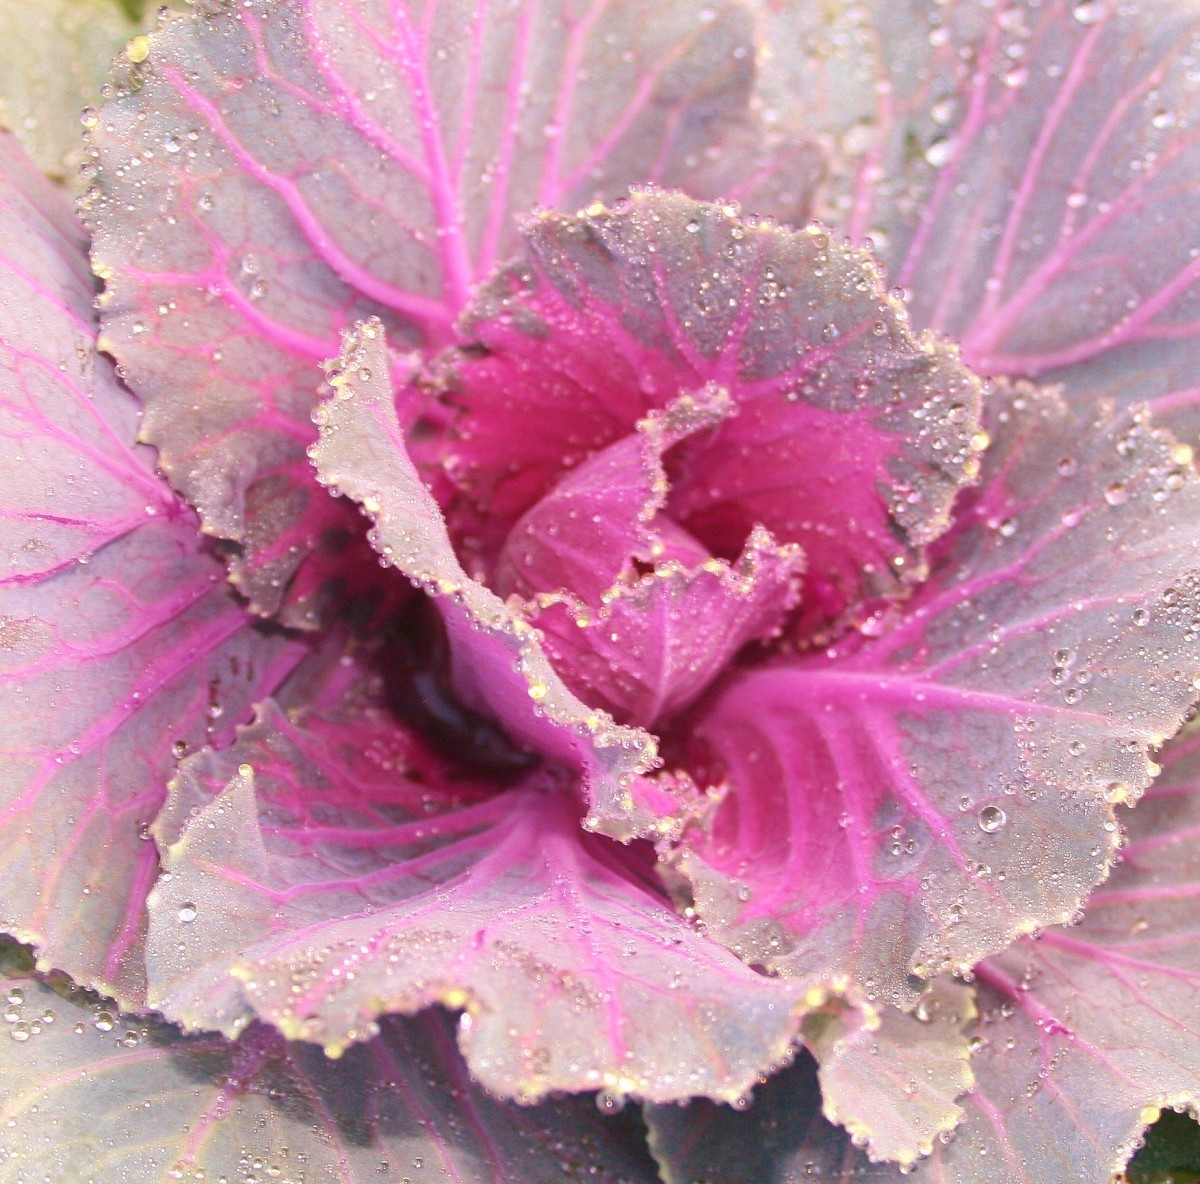 Ornamental cabbage, kale, cauliflower & other members of the Brassica oleracea family produce beautiful, tough leaves with wonderful texture & bold colors perfectly suited to the winter garden. 